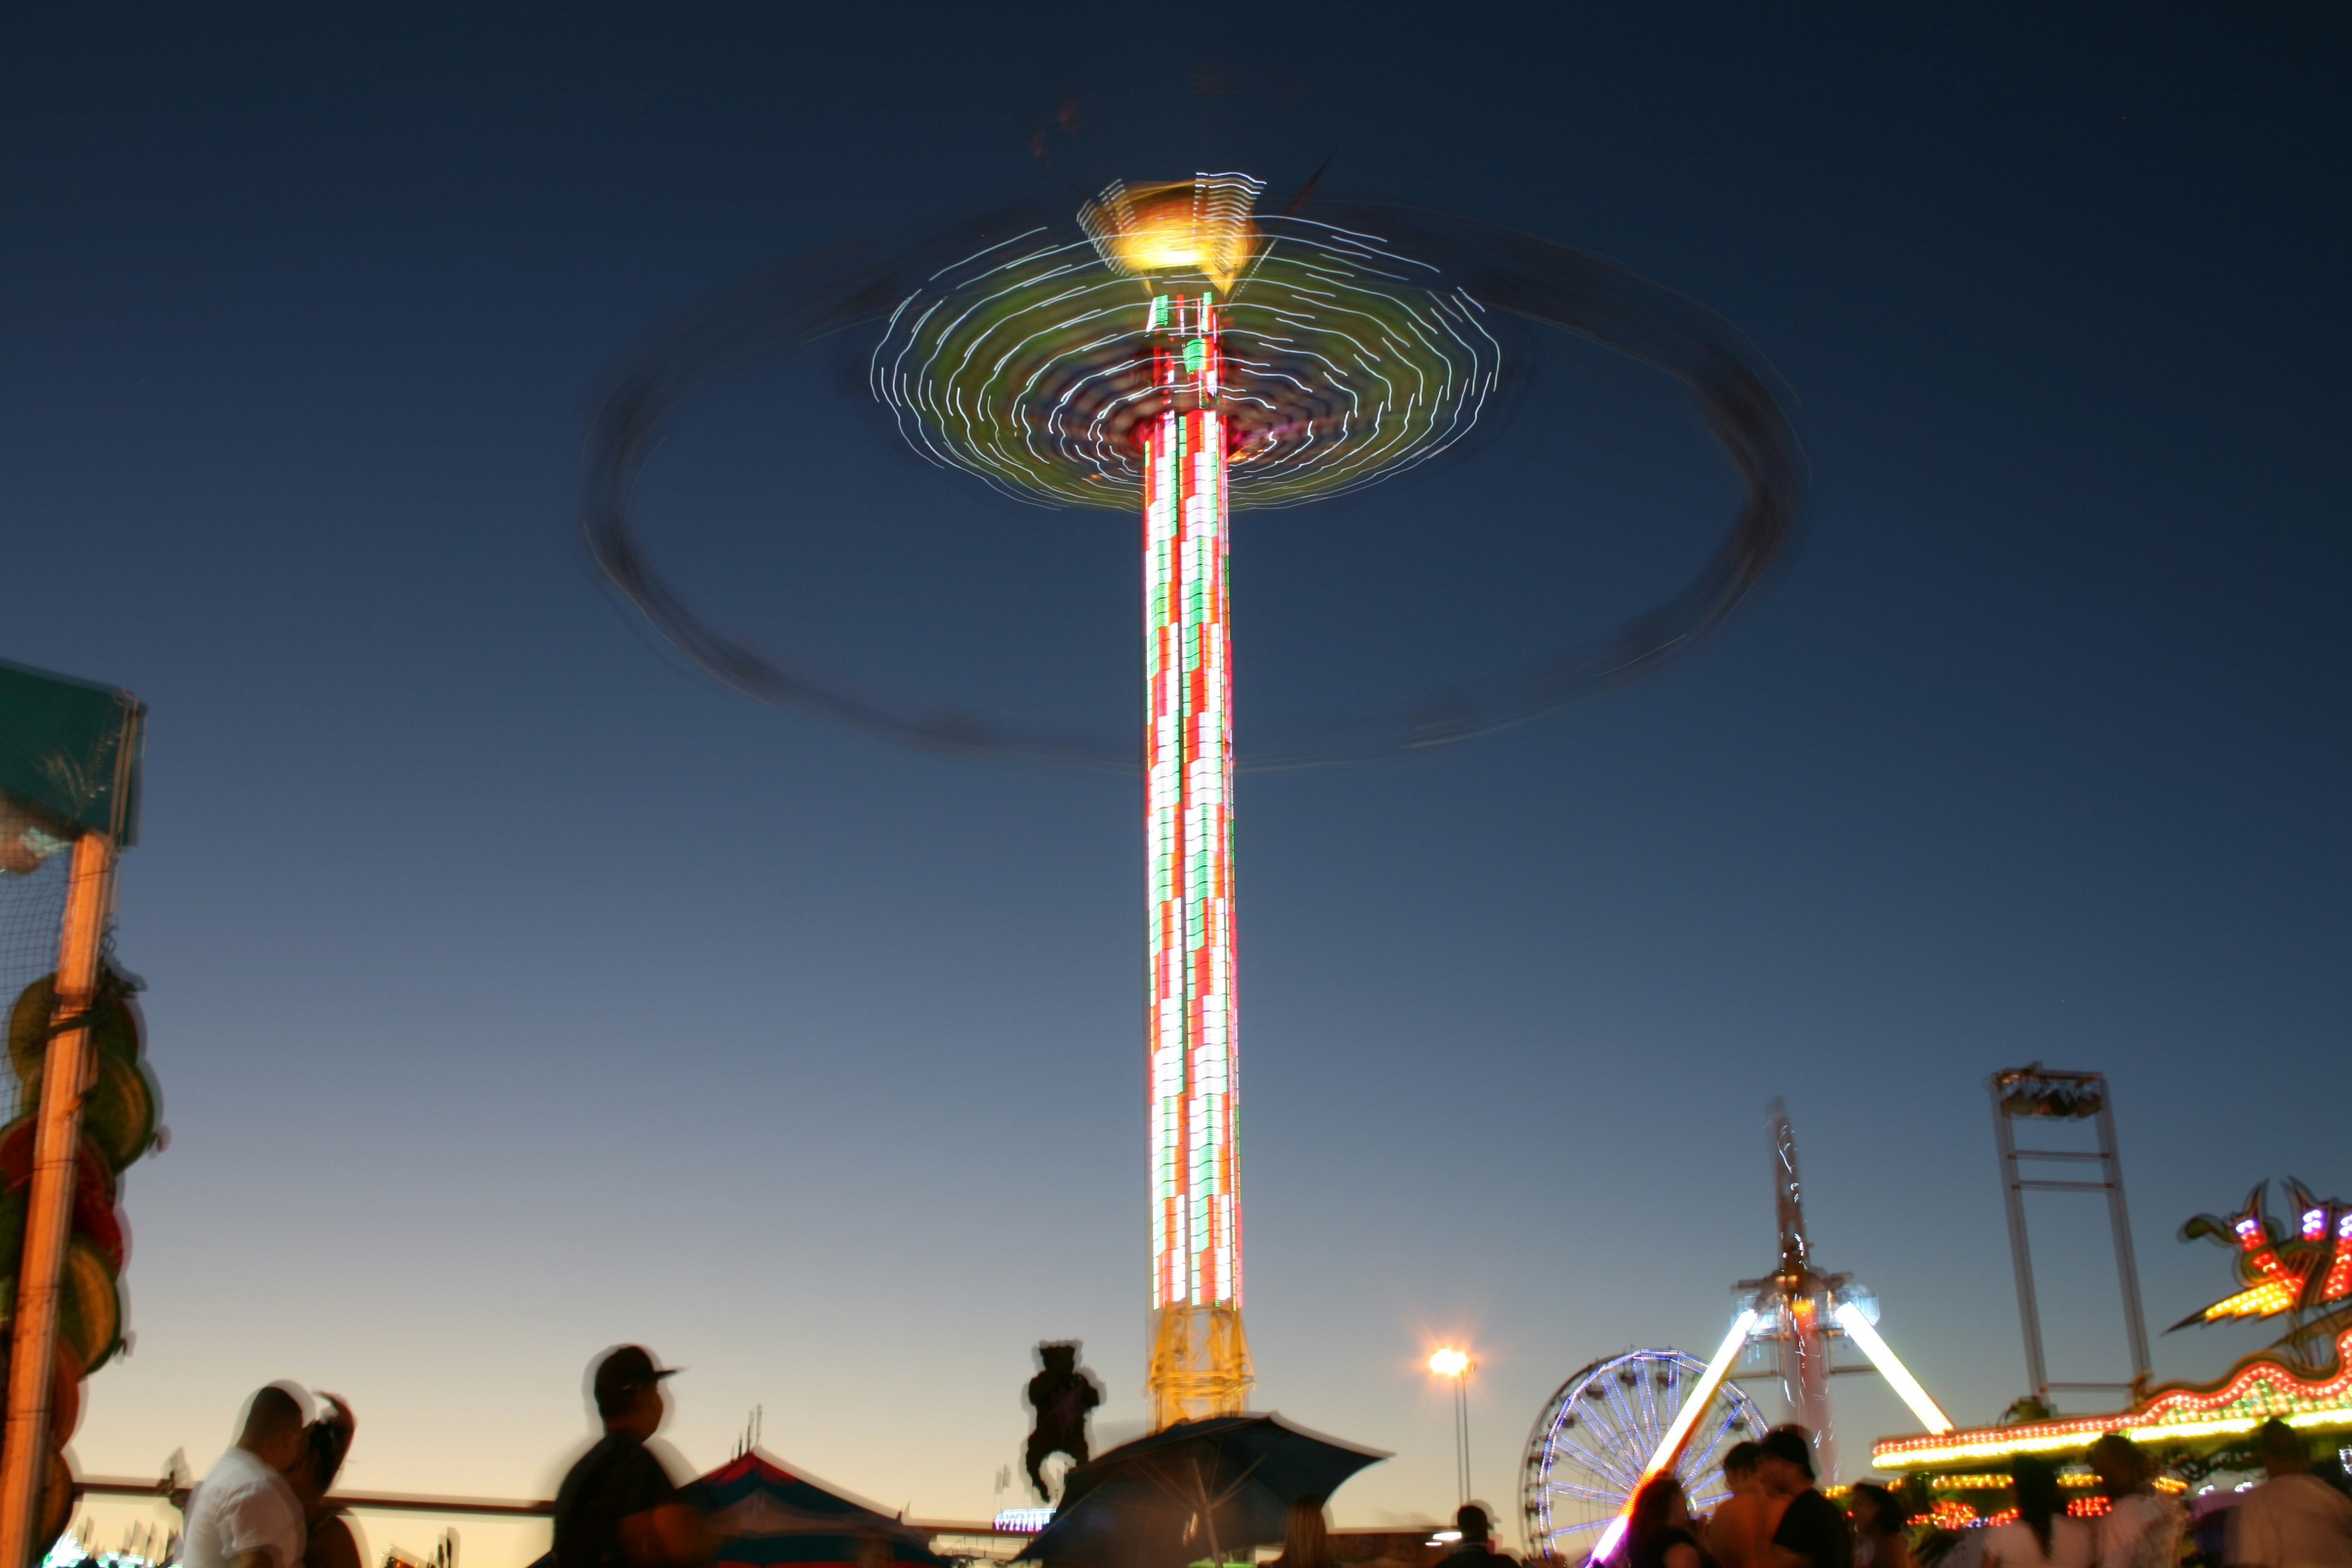 lighted spin amusement ride